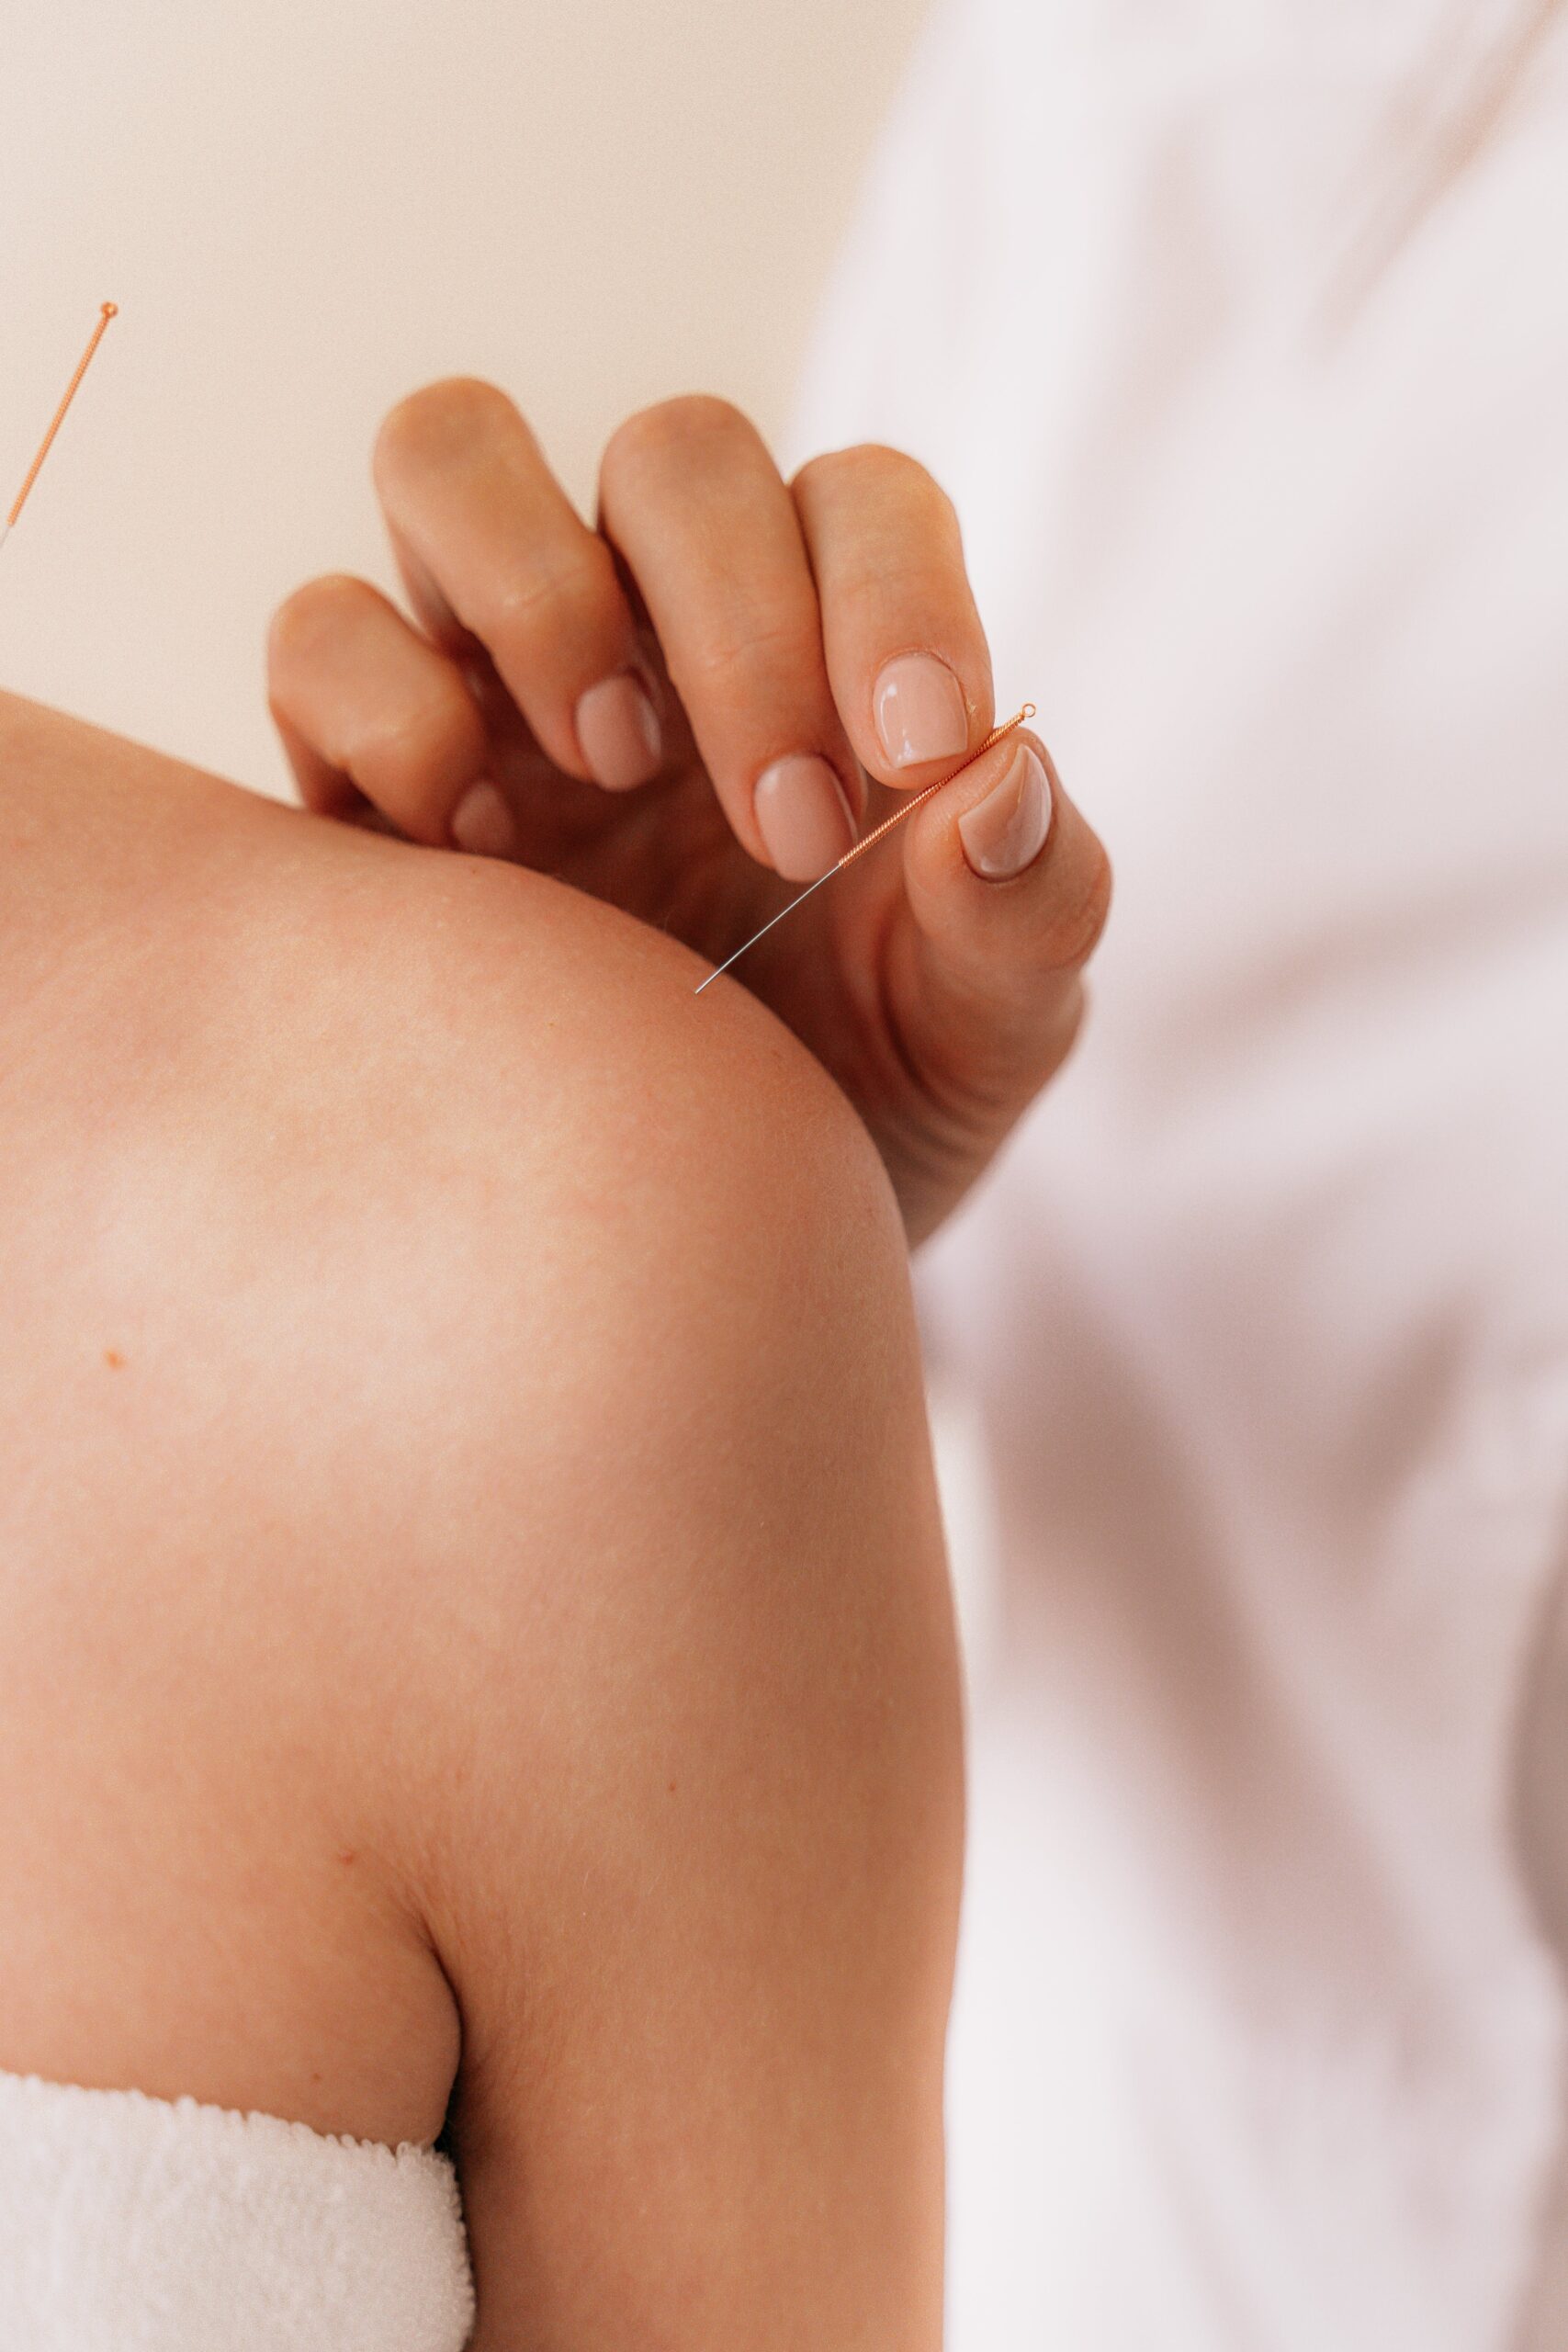 HOW TO USE ACUPUNCTURE FOR ROTATOR CUFF PAIN RELIEF